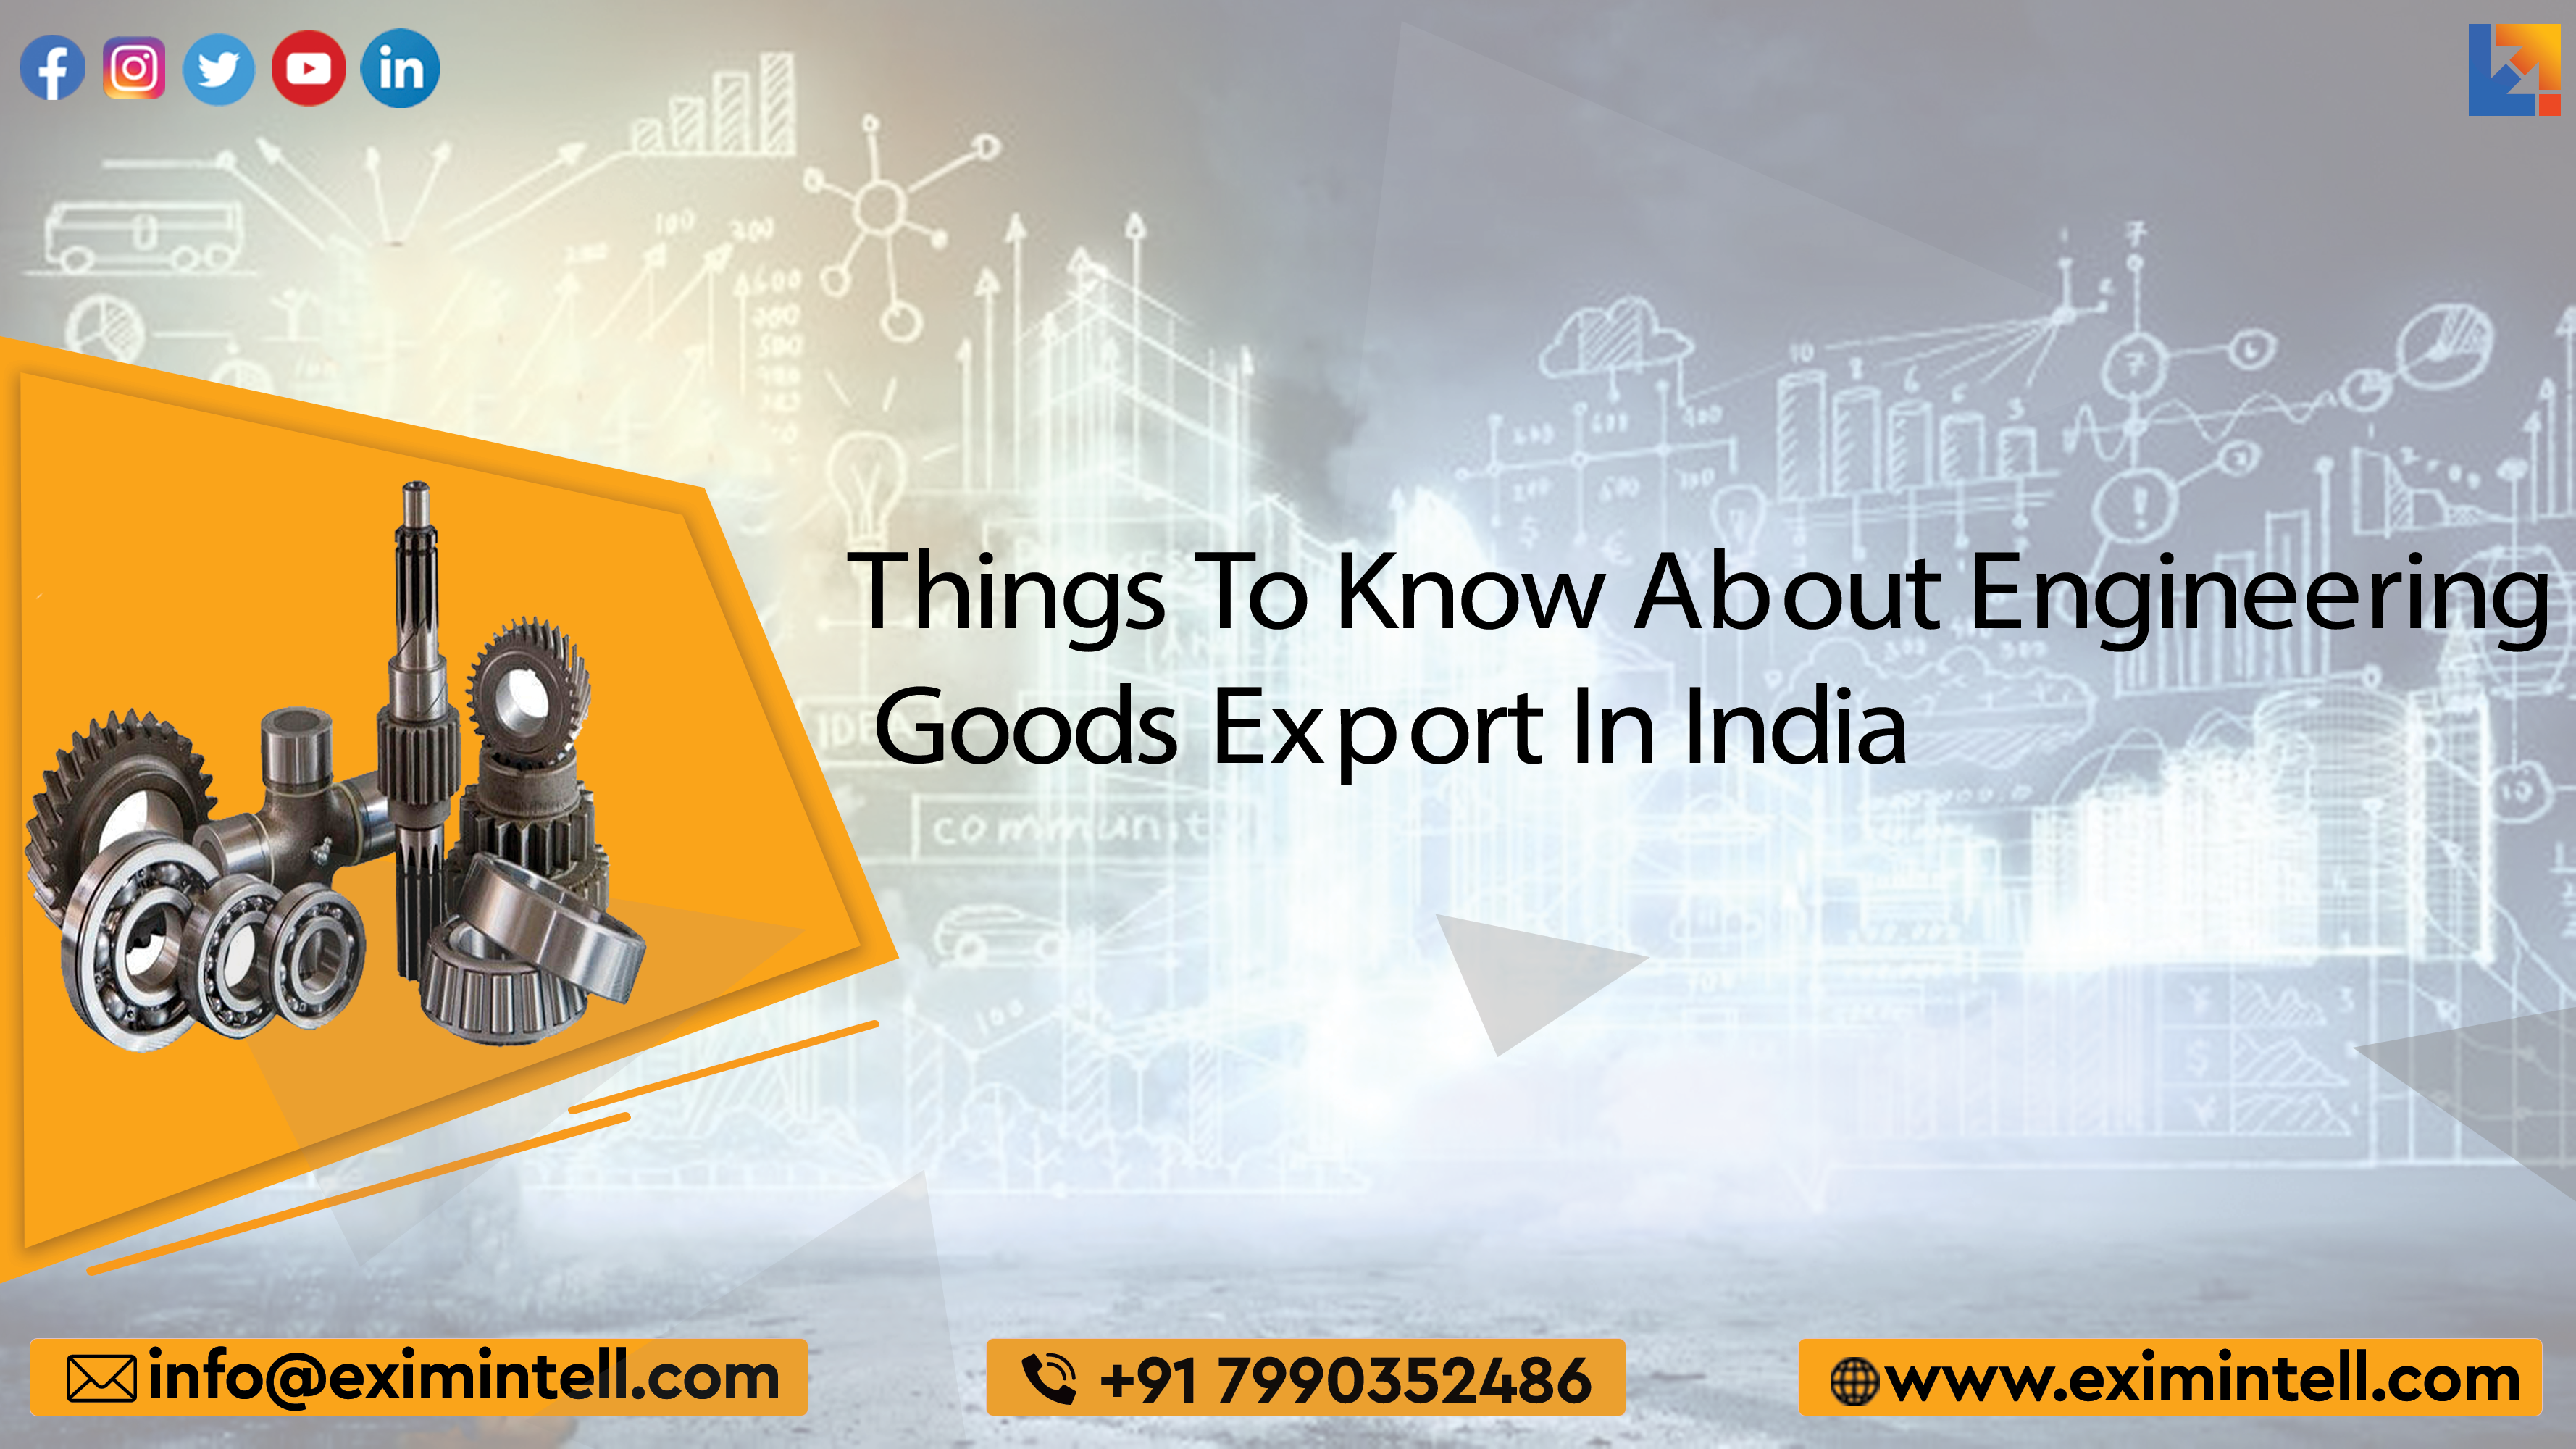 Things To Know About Engineering Goods Export In India